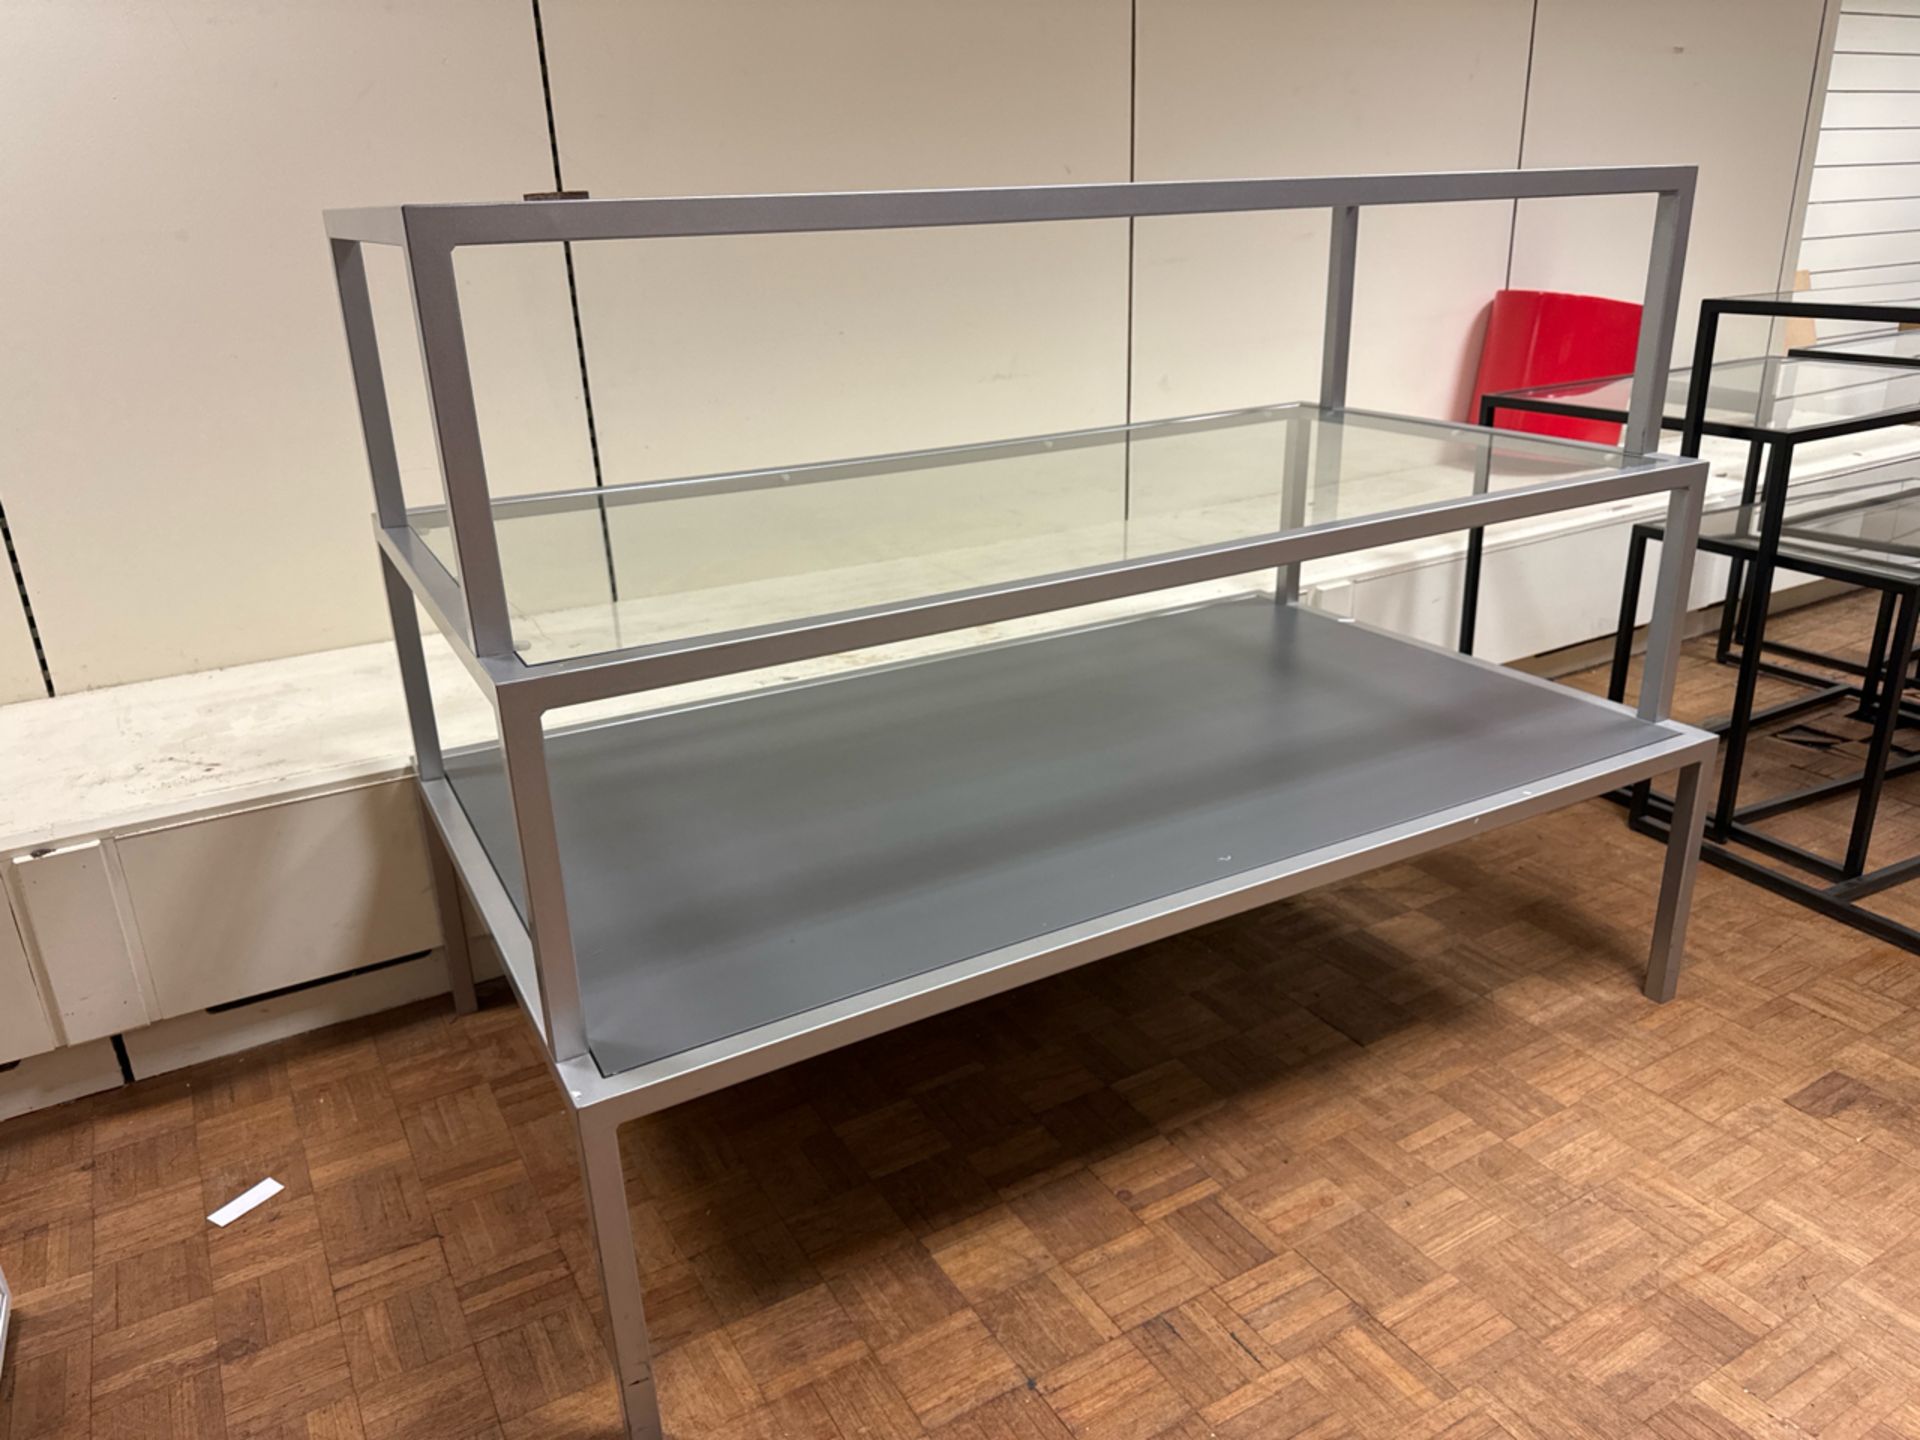 Tiered Glass Display Unit - Image 2 of 4